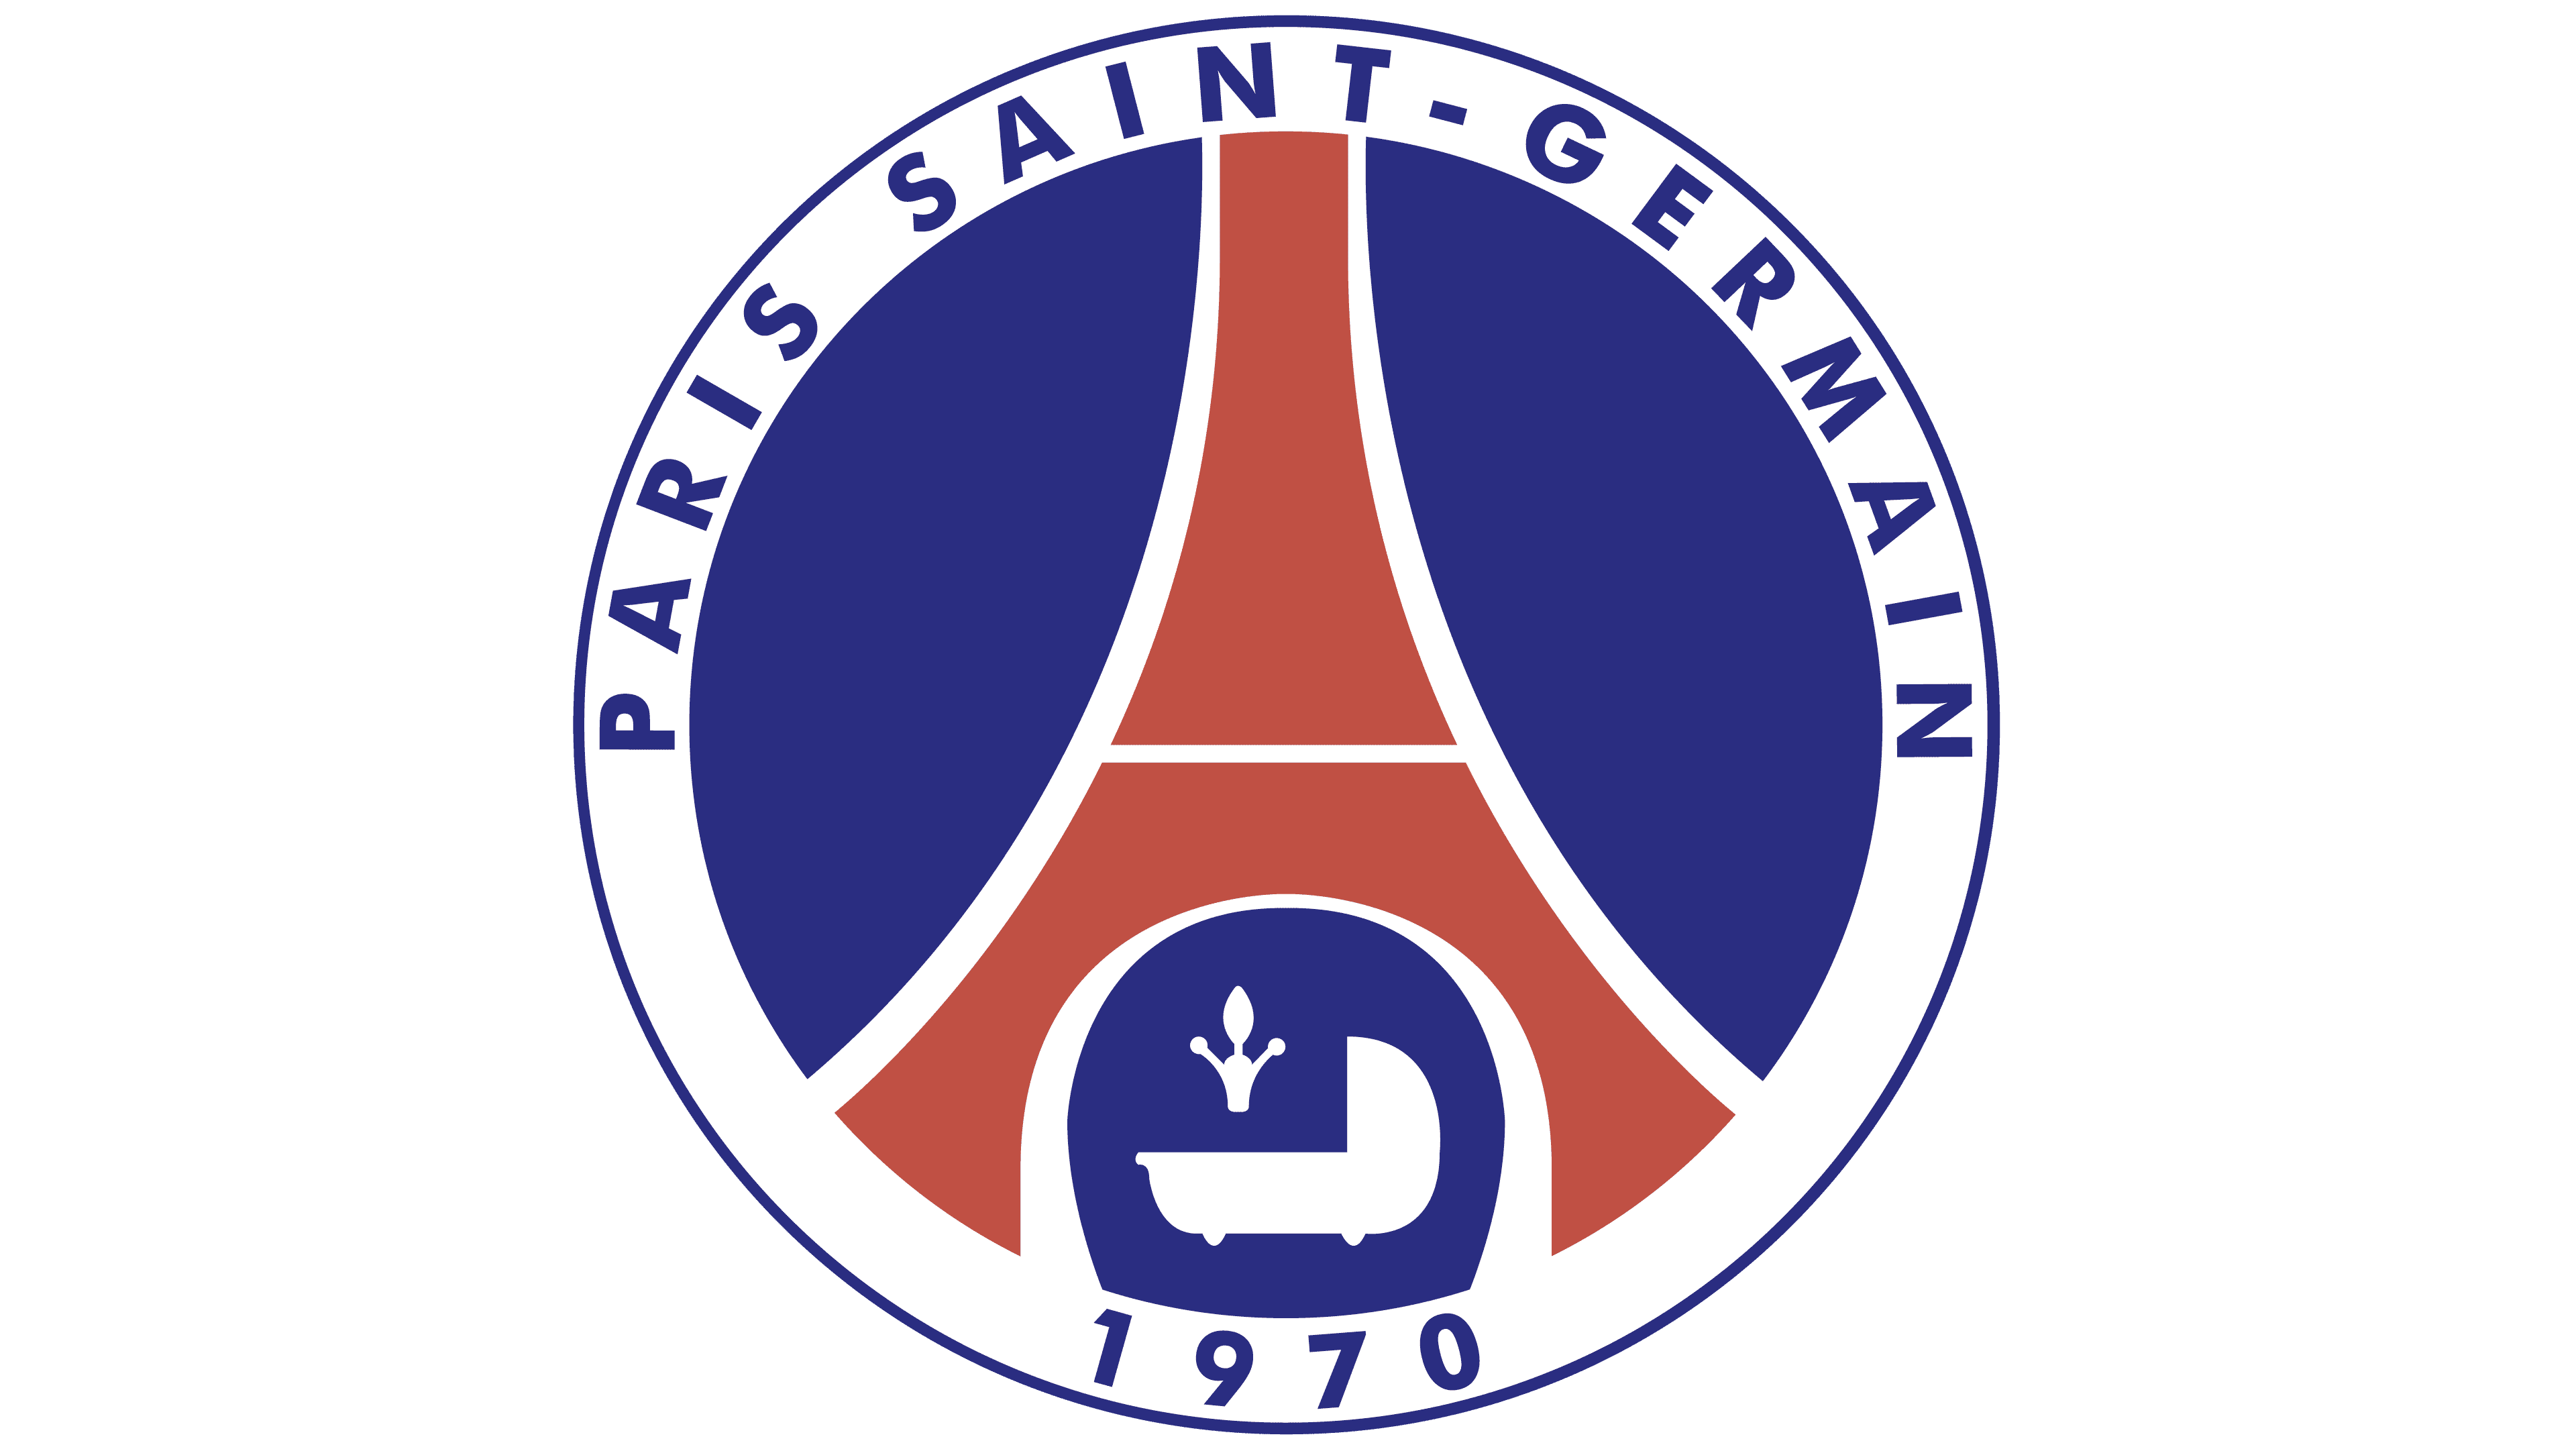 PSG Logo History - The most famous brands and company logos in the world